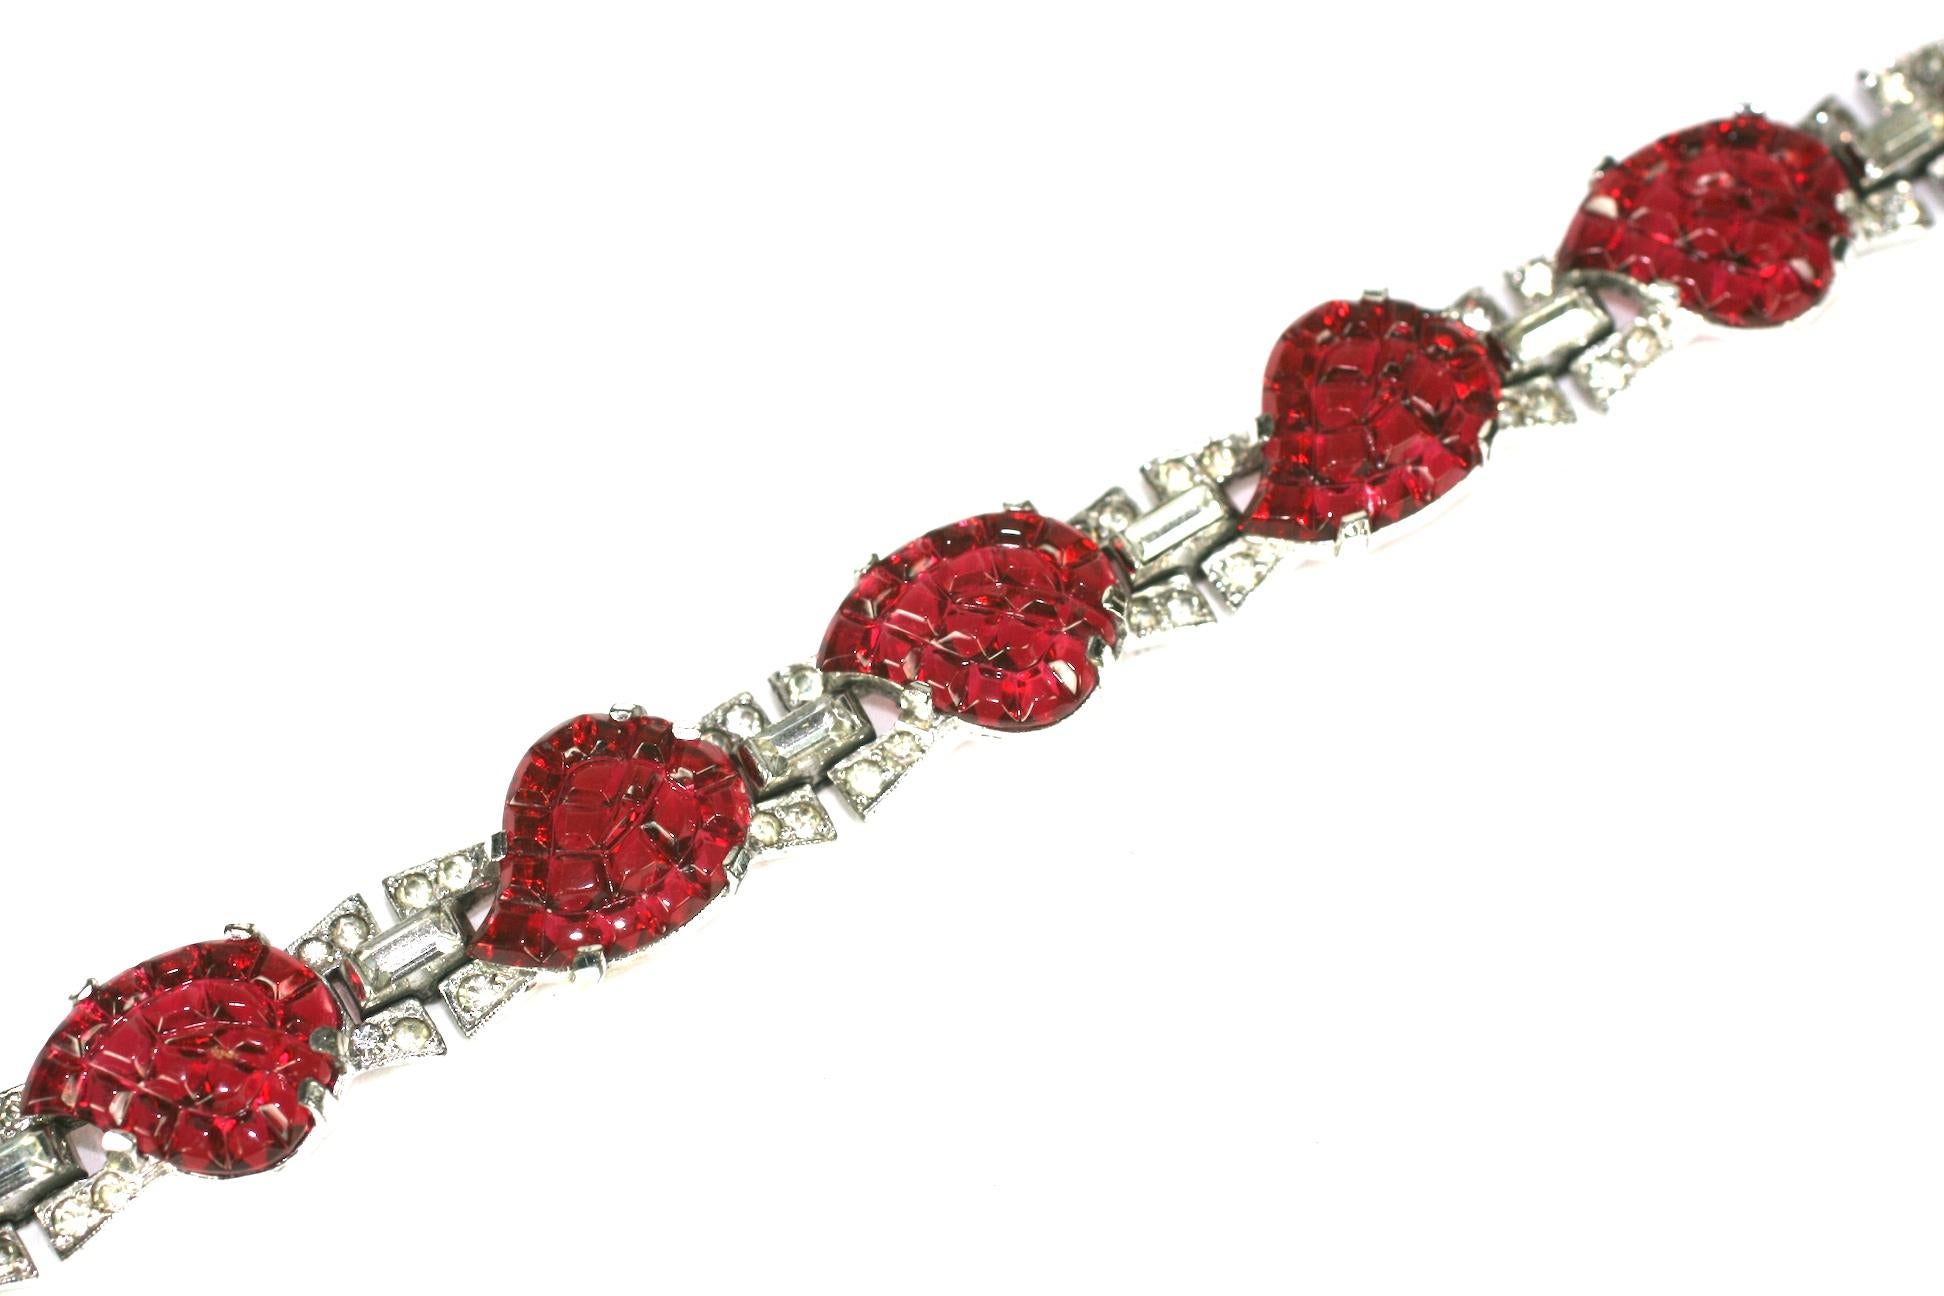 Mazer Art Deco faux ruby leaves invisibly set link bracelet of
rhodium plated base metal,  small crystal rhinestone pave,  and eight faux invisibly set calibre pressed ruby glass. The non-use of Sterling dates this to 1938  through 1942.
Excellent